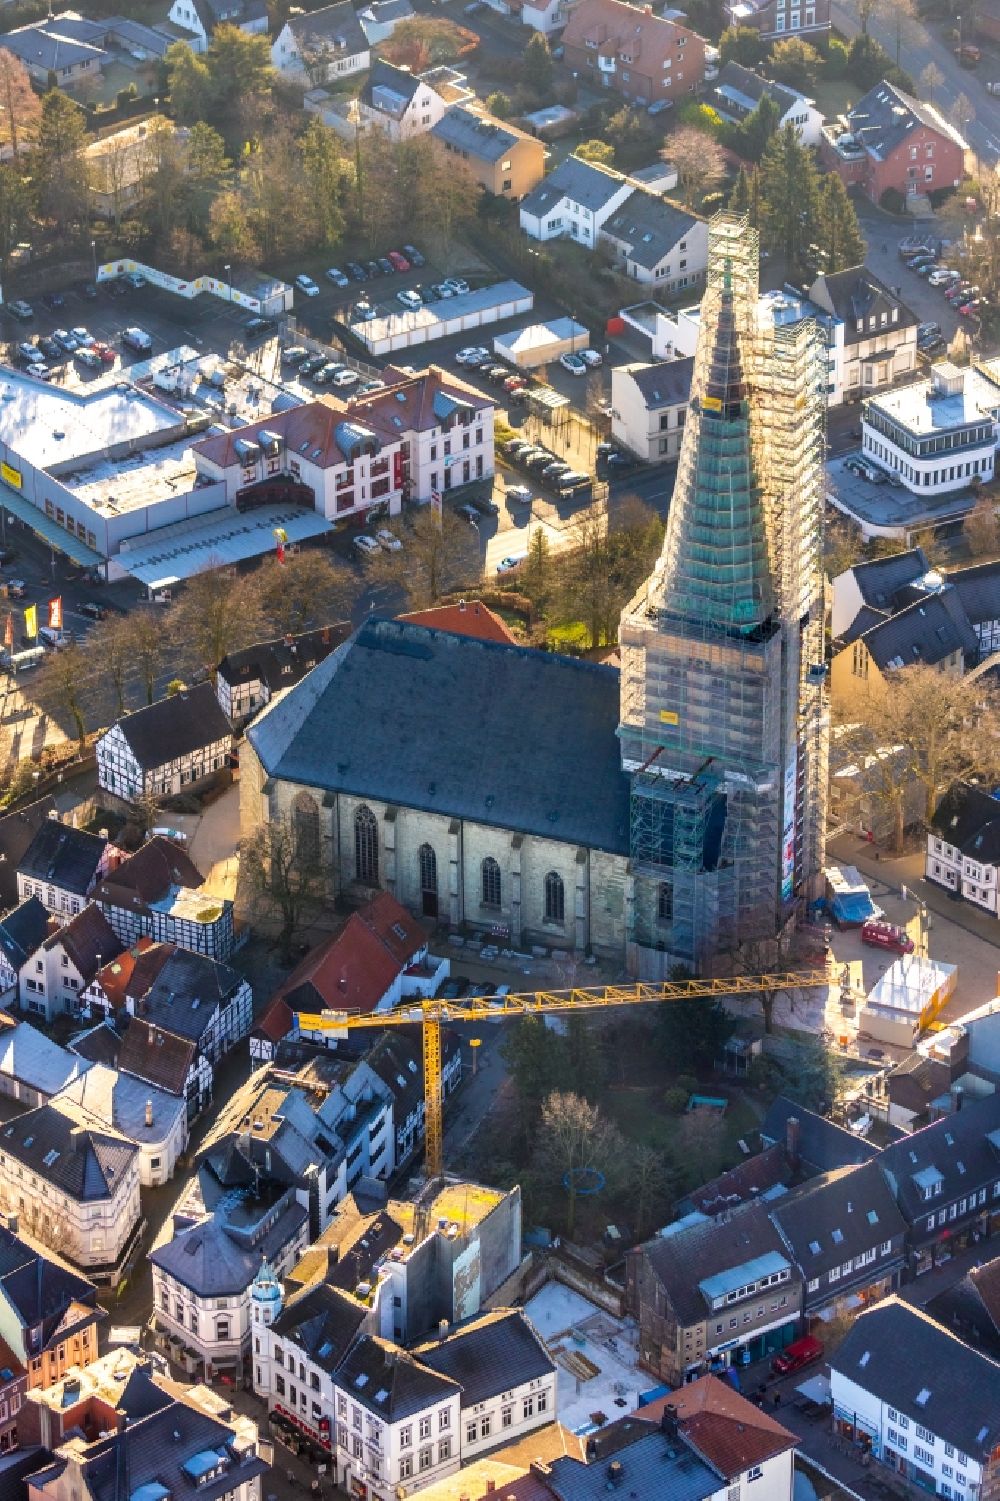 Unna from above - Renovation work on the church building Evangelische Stadtkirche in Unna in the federal state of North Rhine-Westphalia, Germany